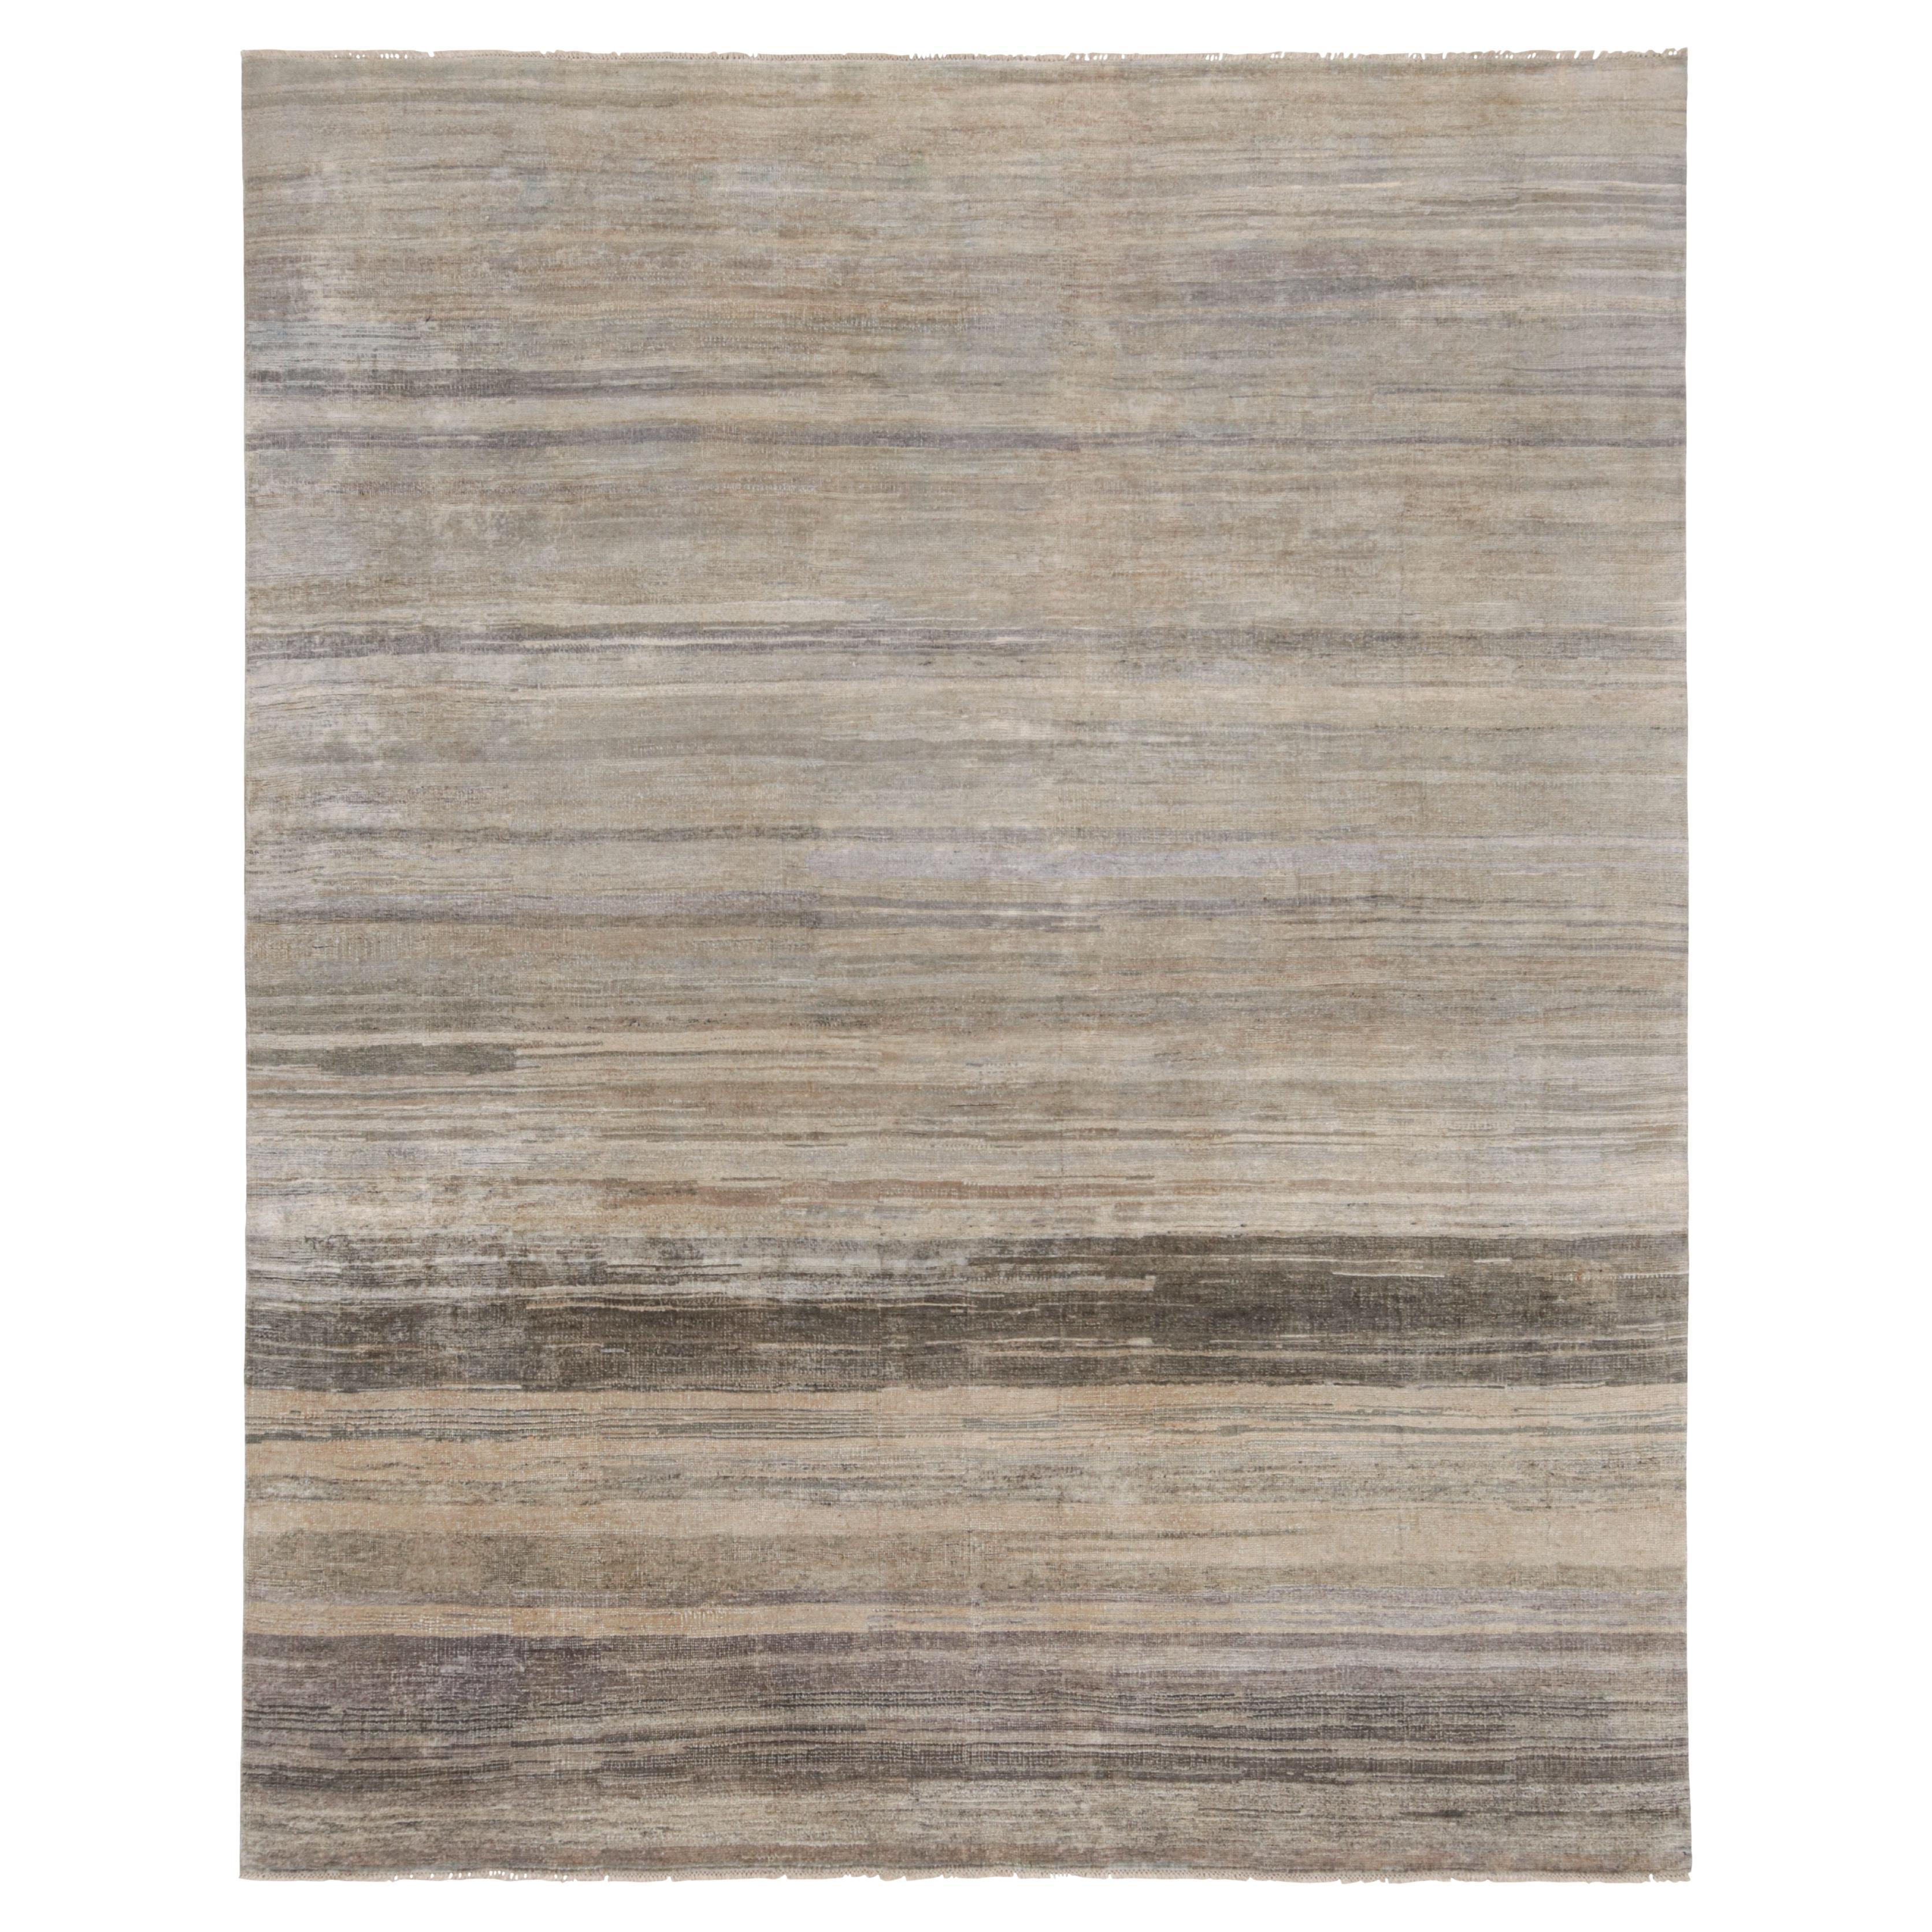 Modern Rug & Kilim’s Textural Rug in Greige Tones and Striae For Sale